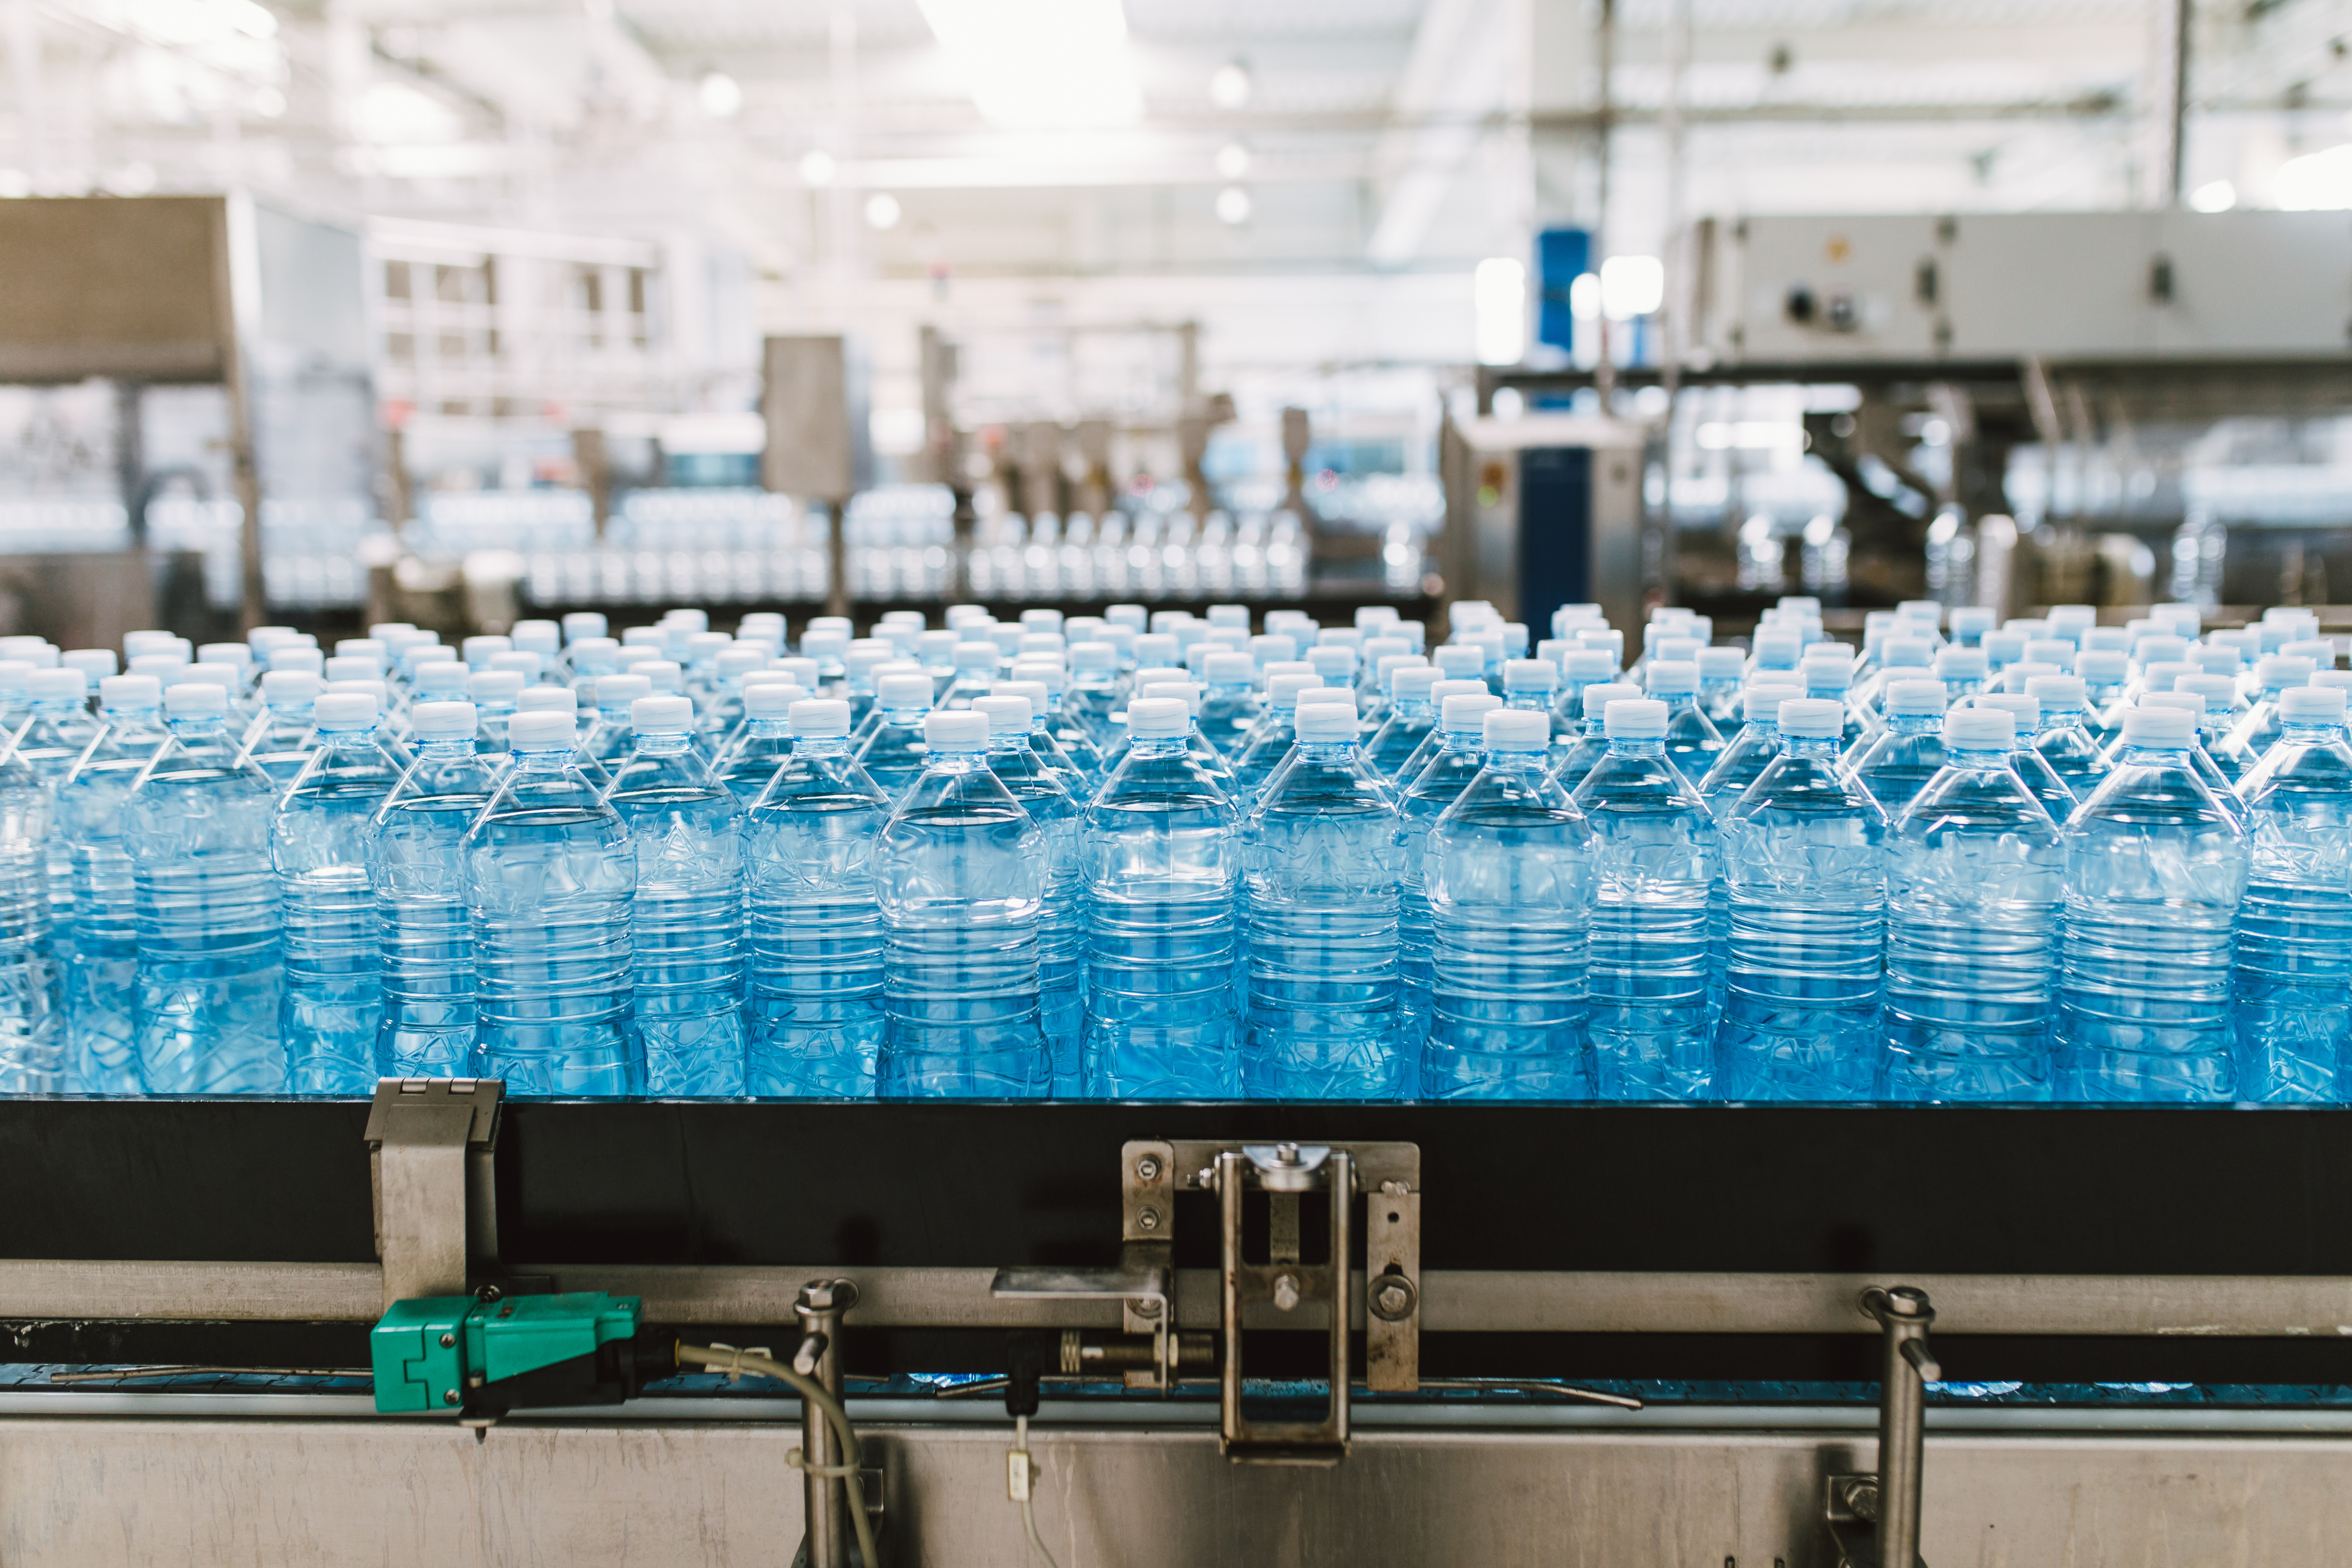 Now what? Next steps for water bottling in Ontario - Environmental Defence